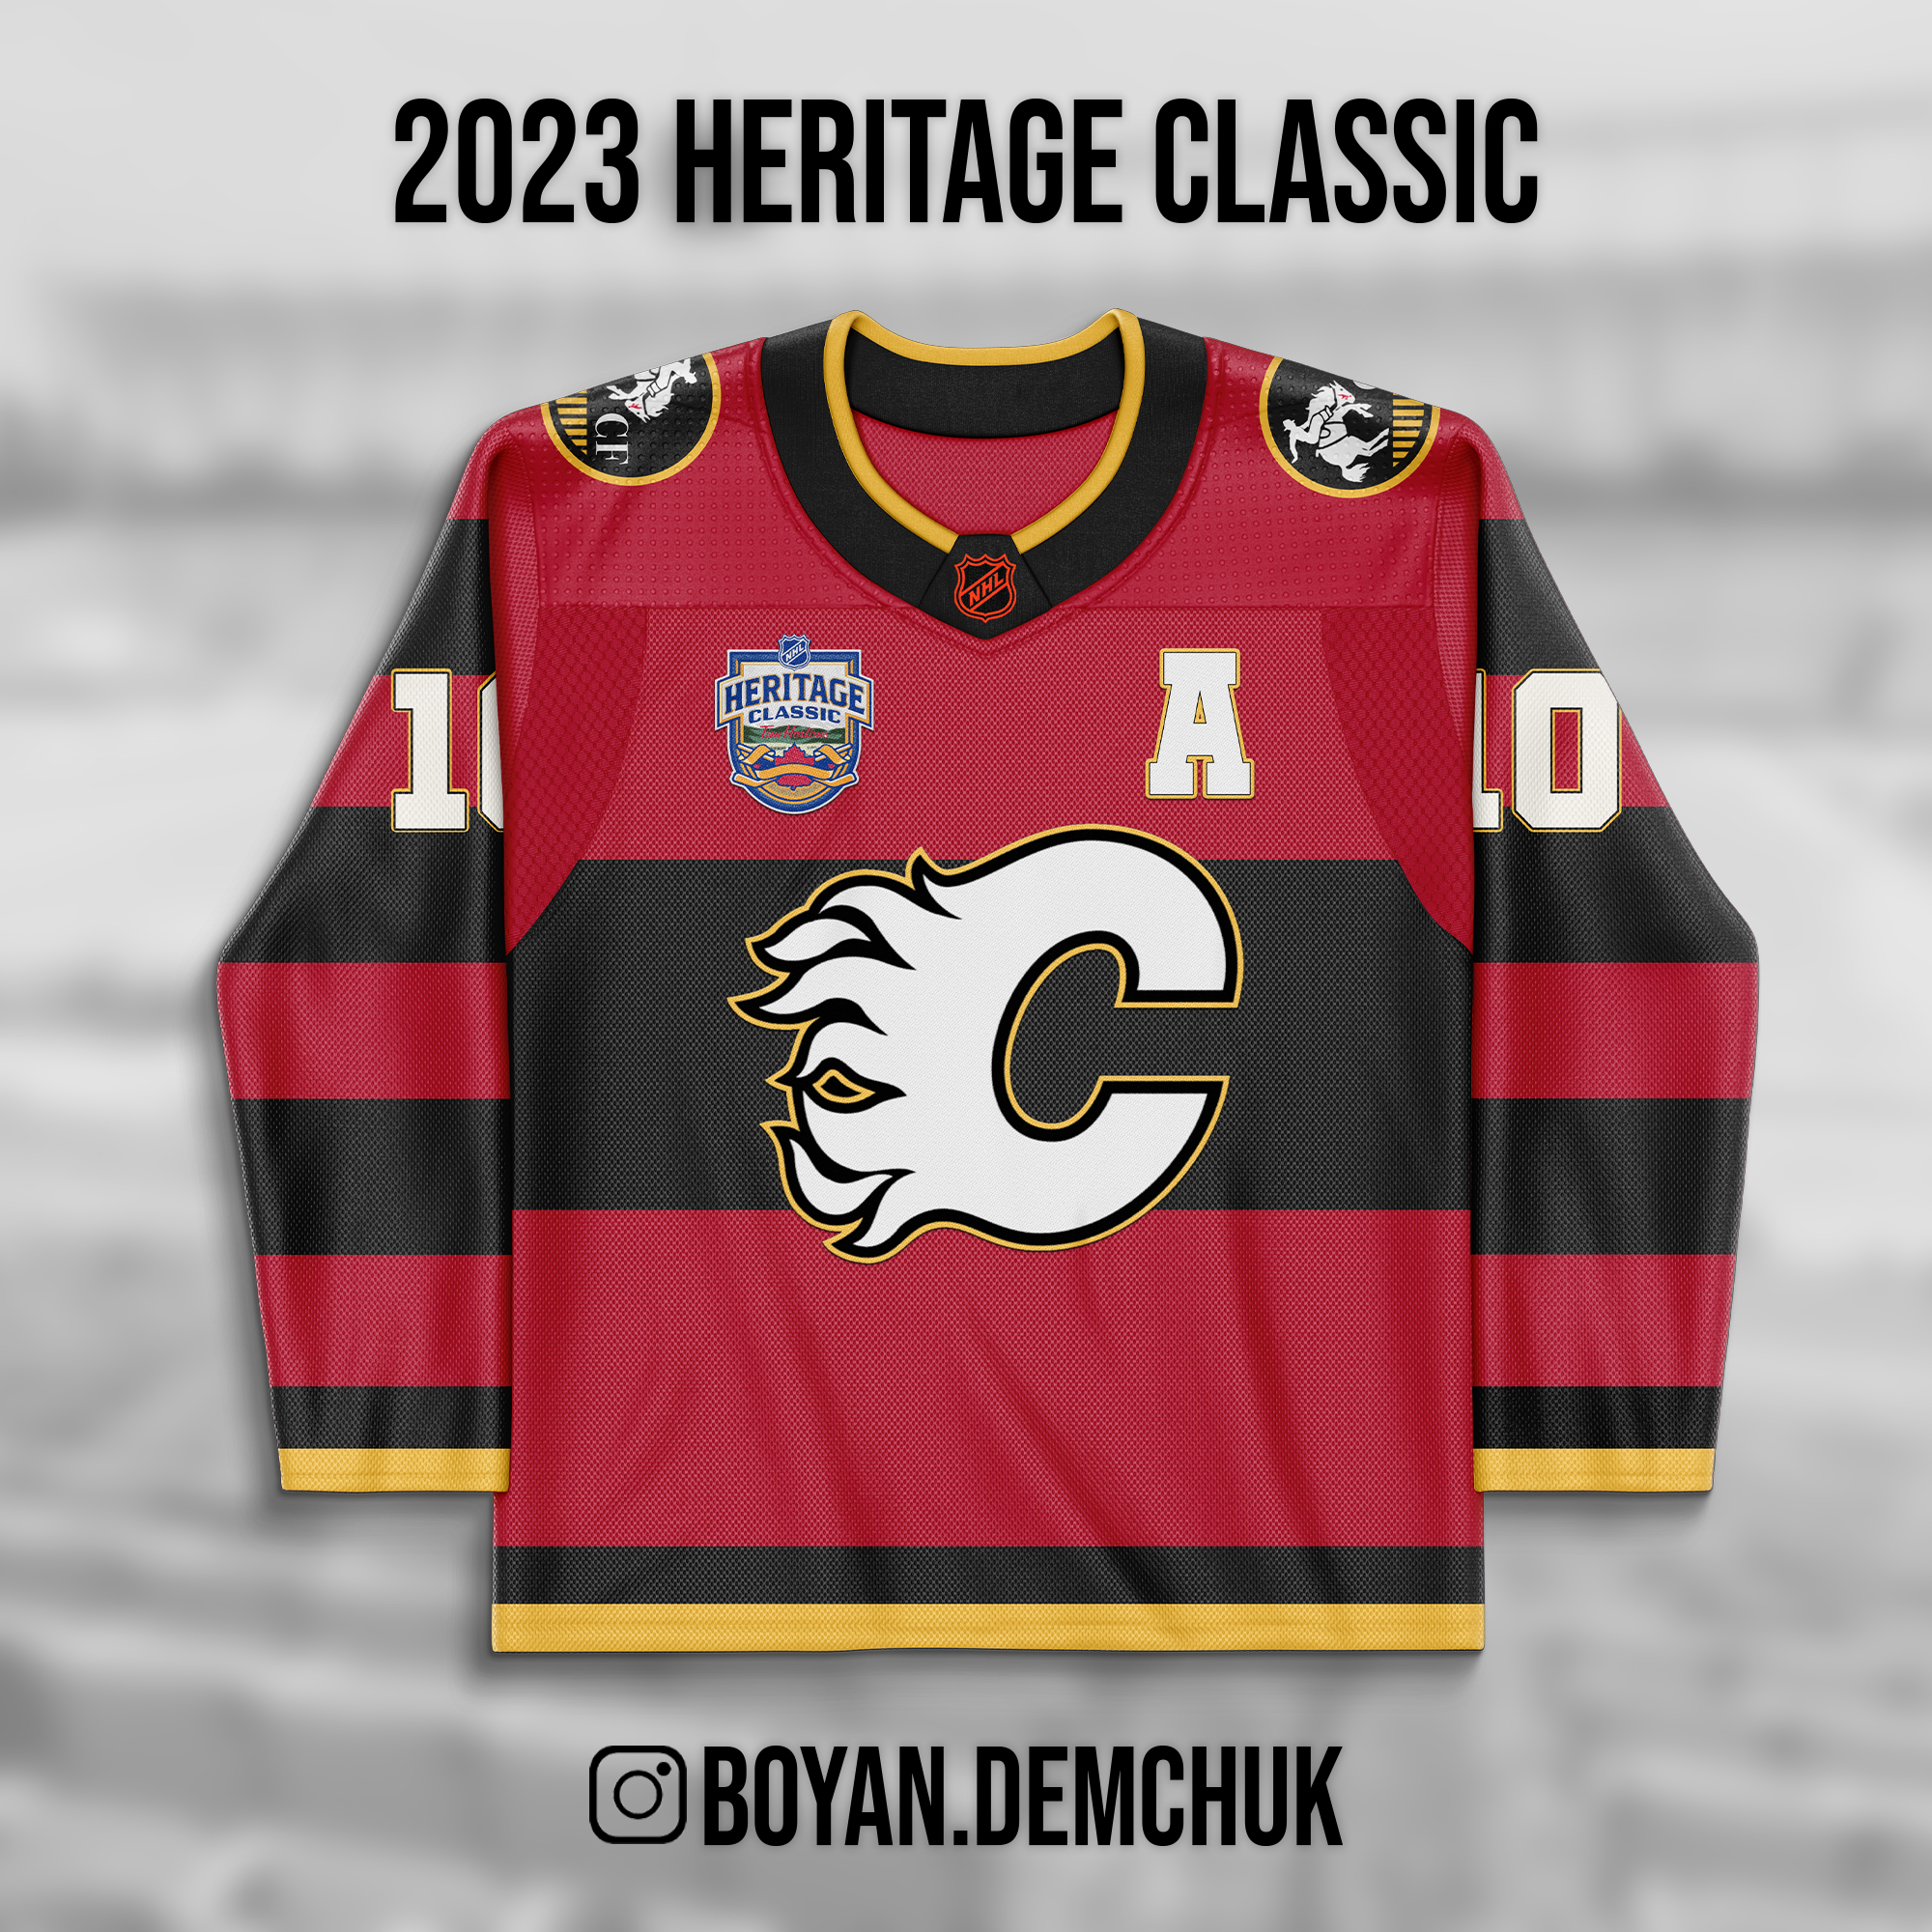 Oilers, Flames Unveil 2023 Heritage Classic Uniforms - The Hockey News